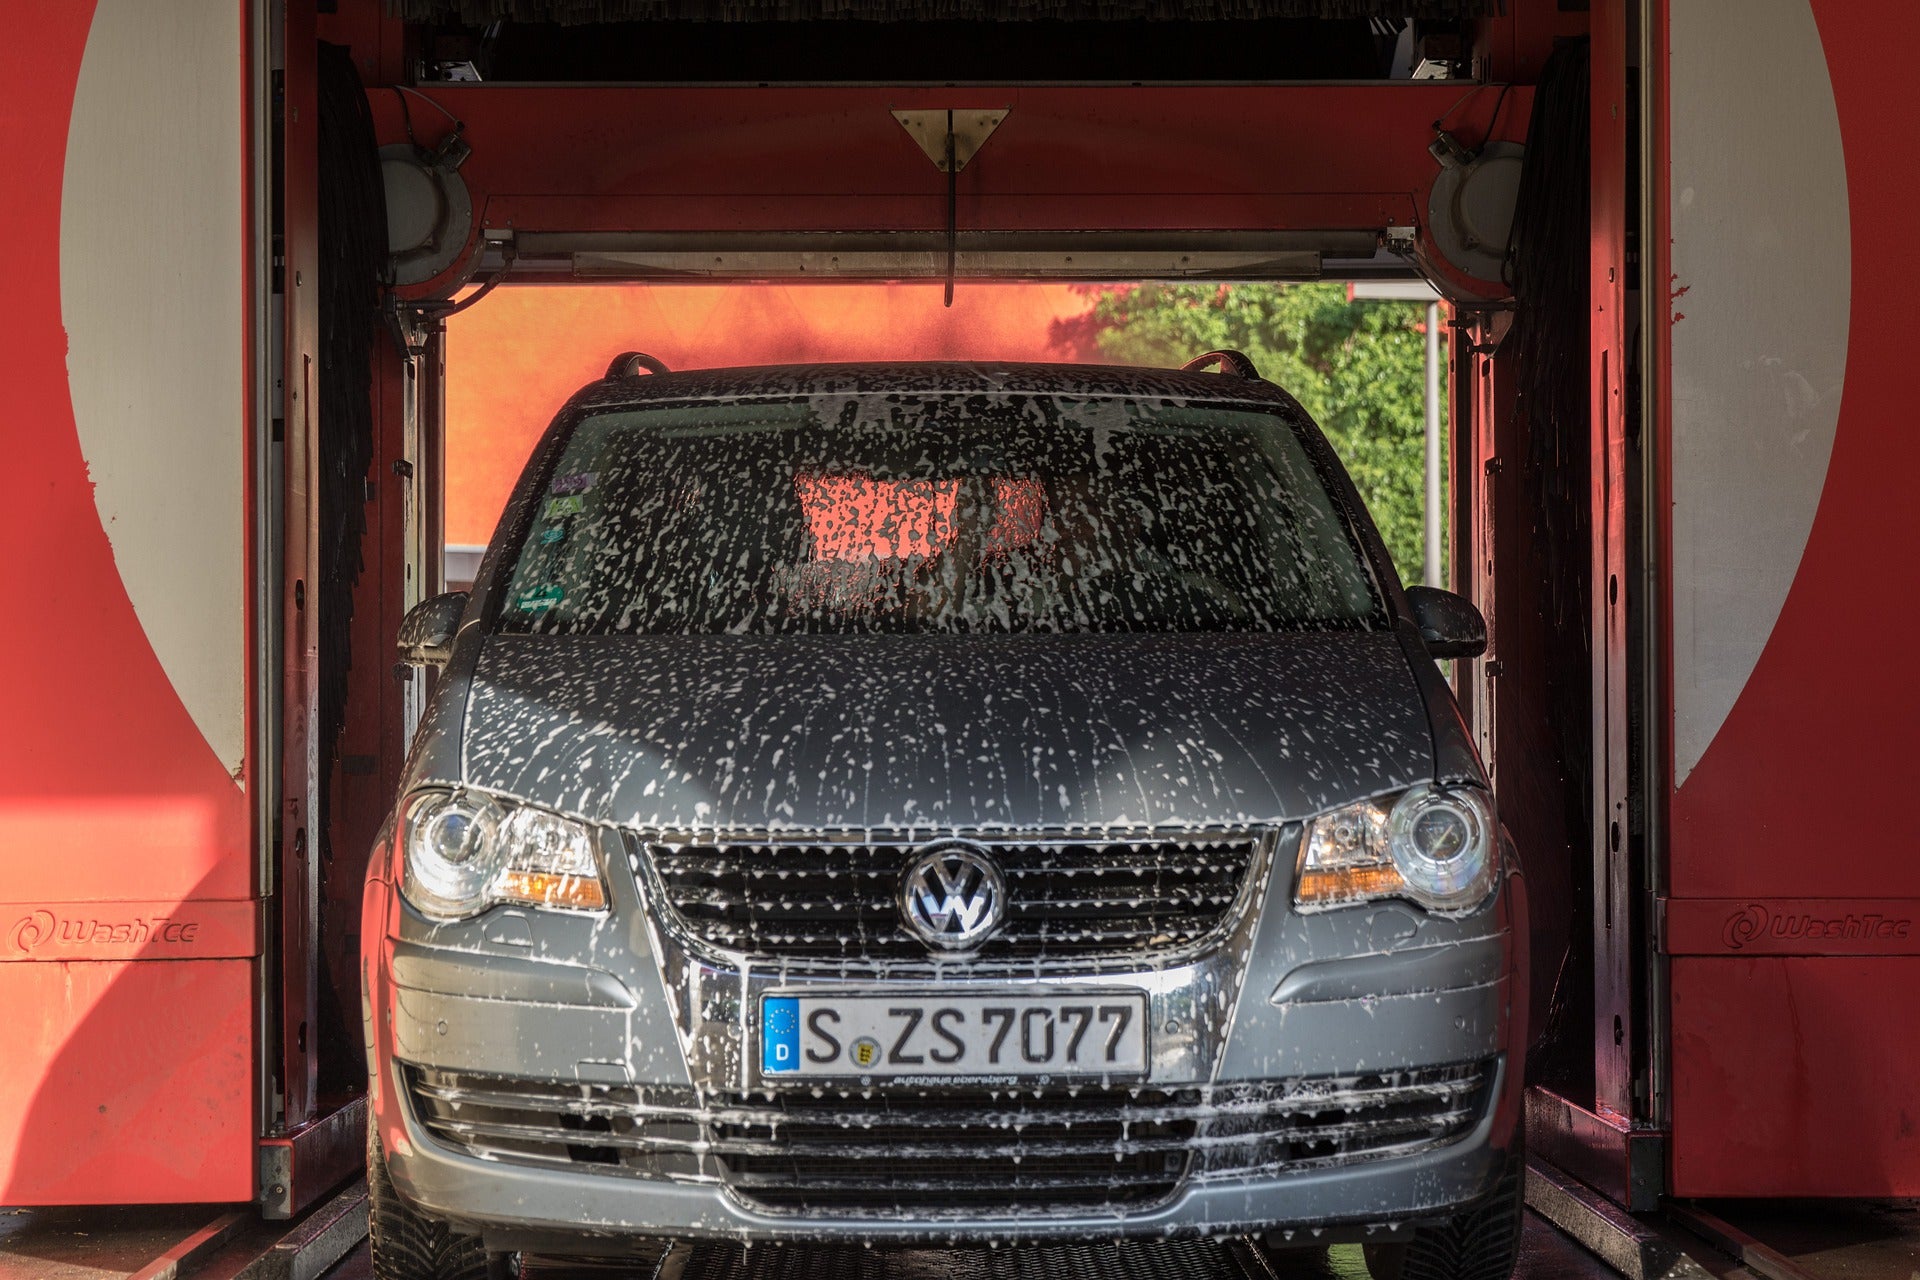 Which is better, a hand car wash or touchless car wash?